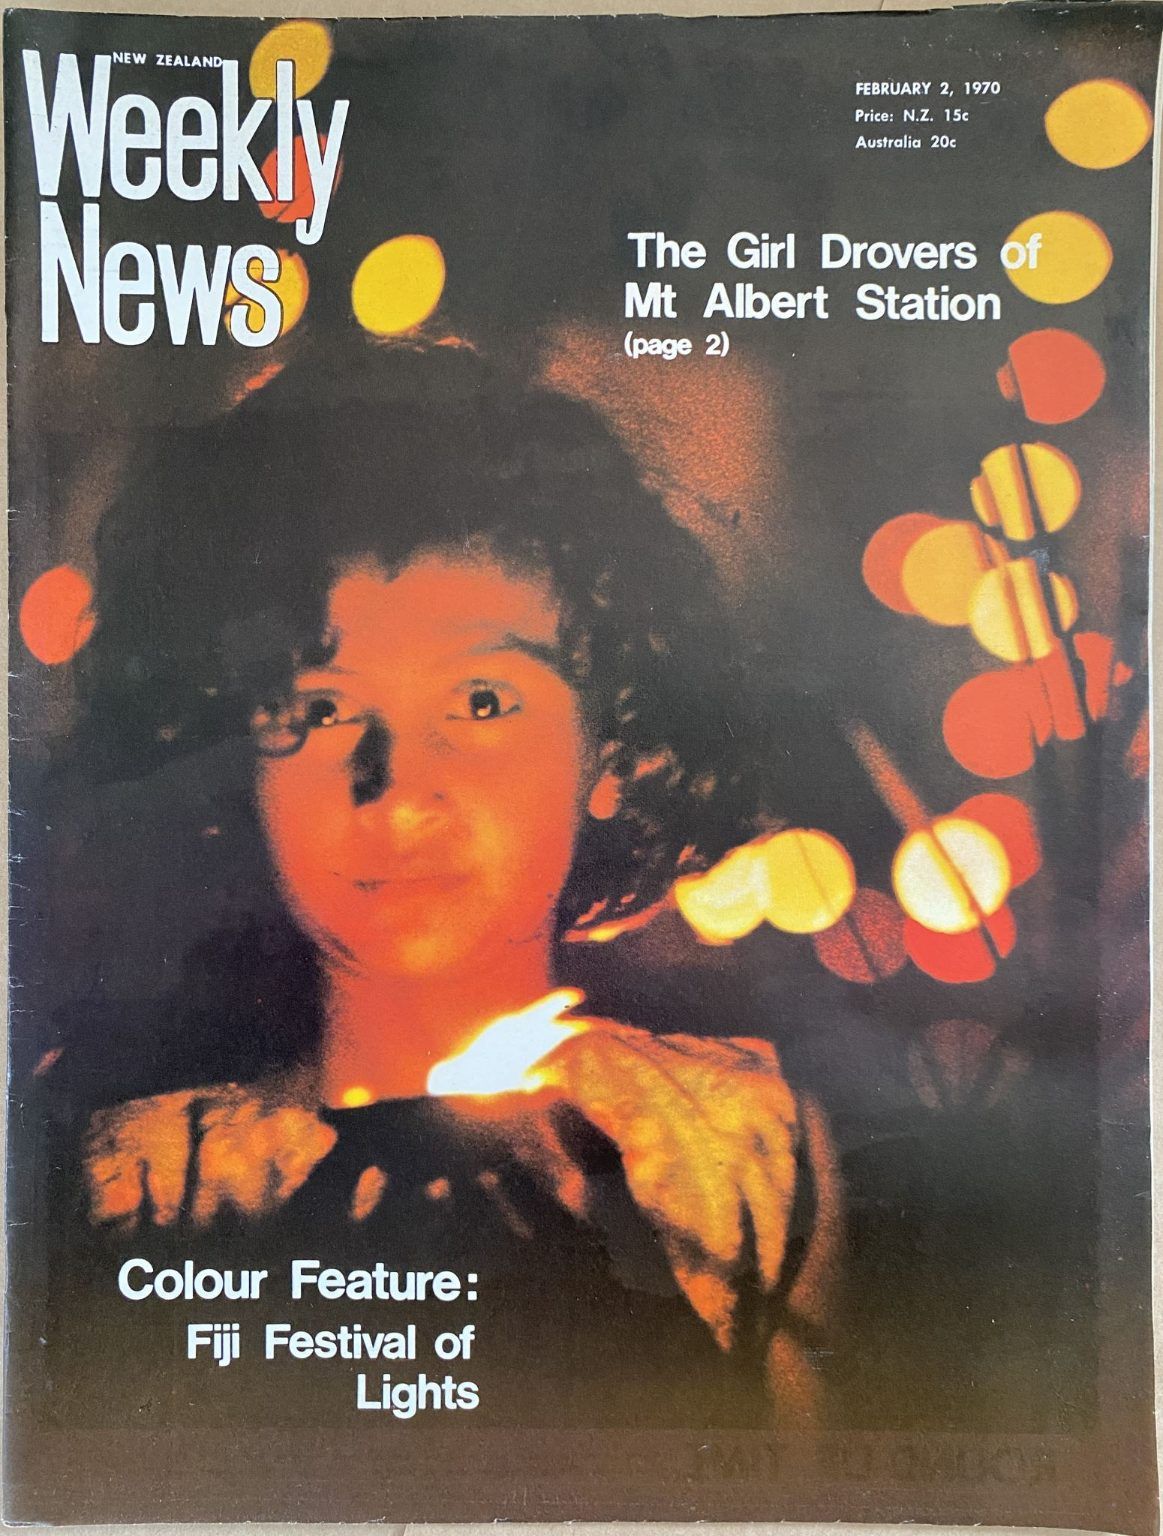 OLD NEWSPAPER: New Zealand Weekly News, No. 5540, 2 February 1970